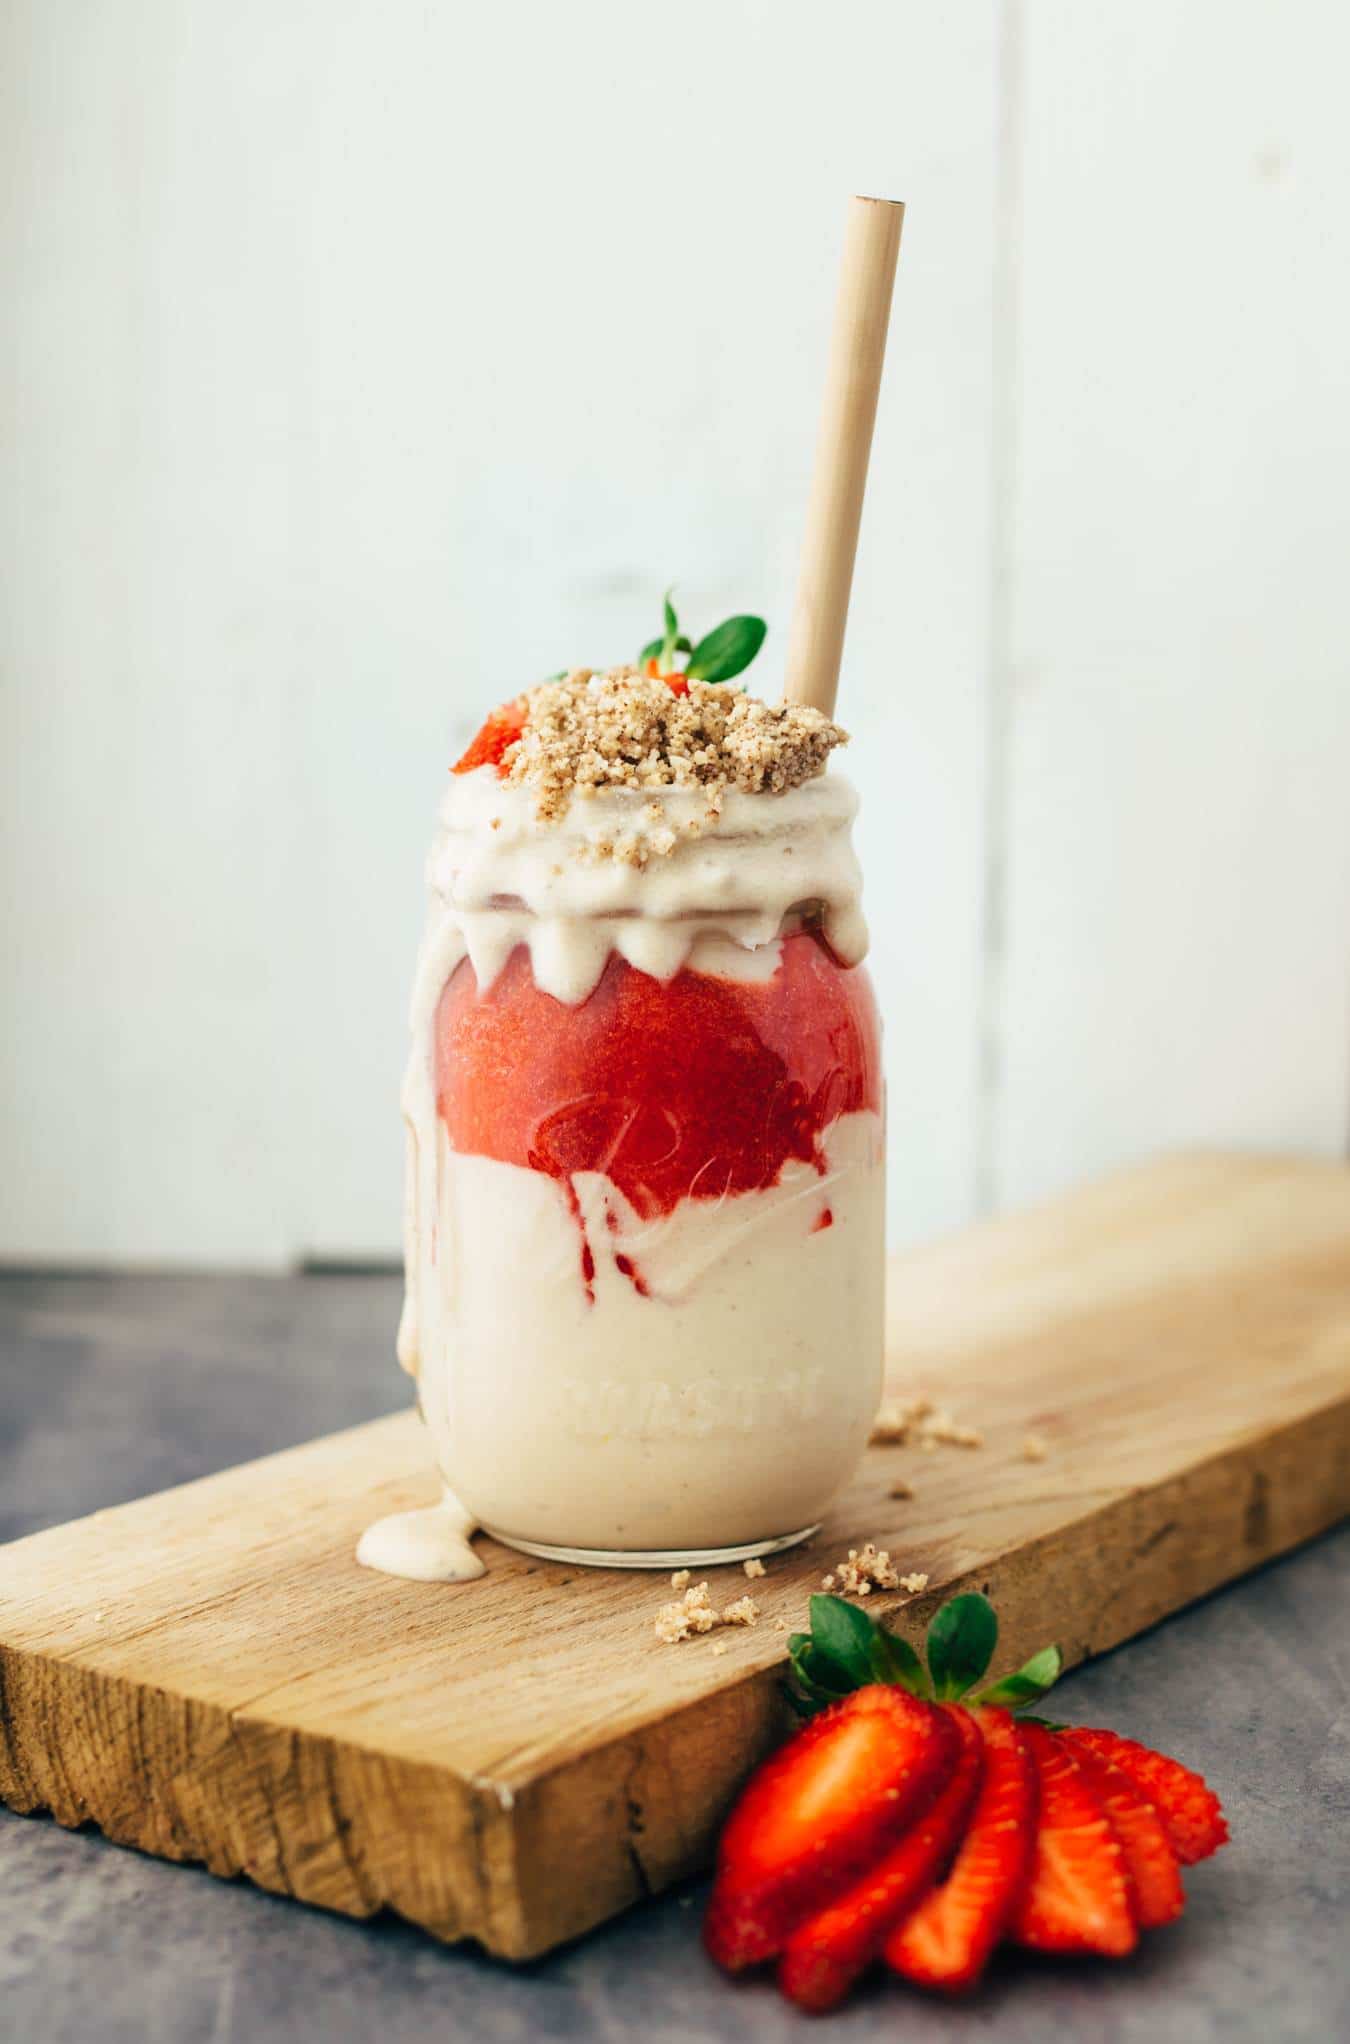 Strawberry protein smoothie with delicious pecan nut crunch recipe